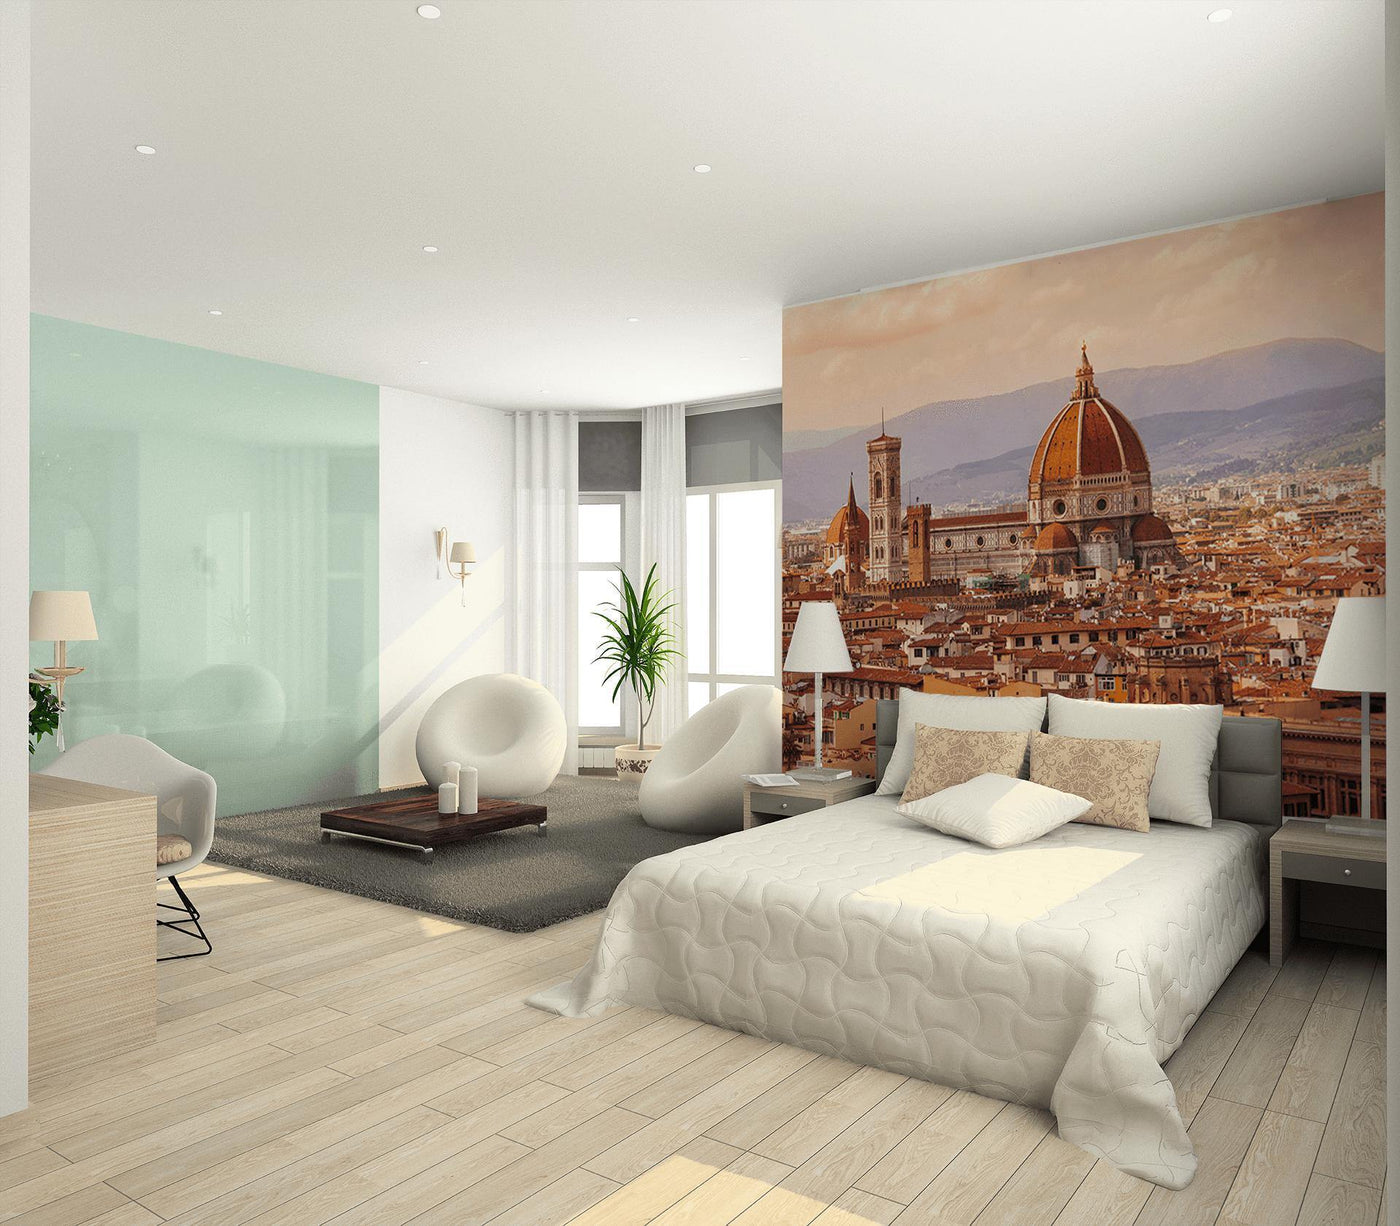 Saint Mary in Florence Wall Mural-Wall Mural-Eazywallz